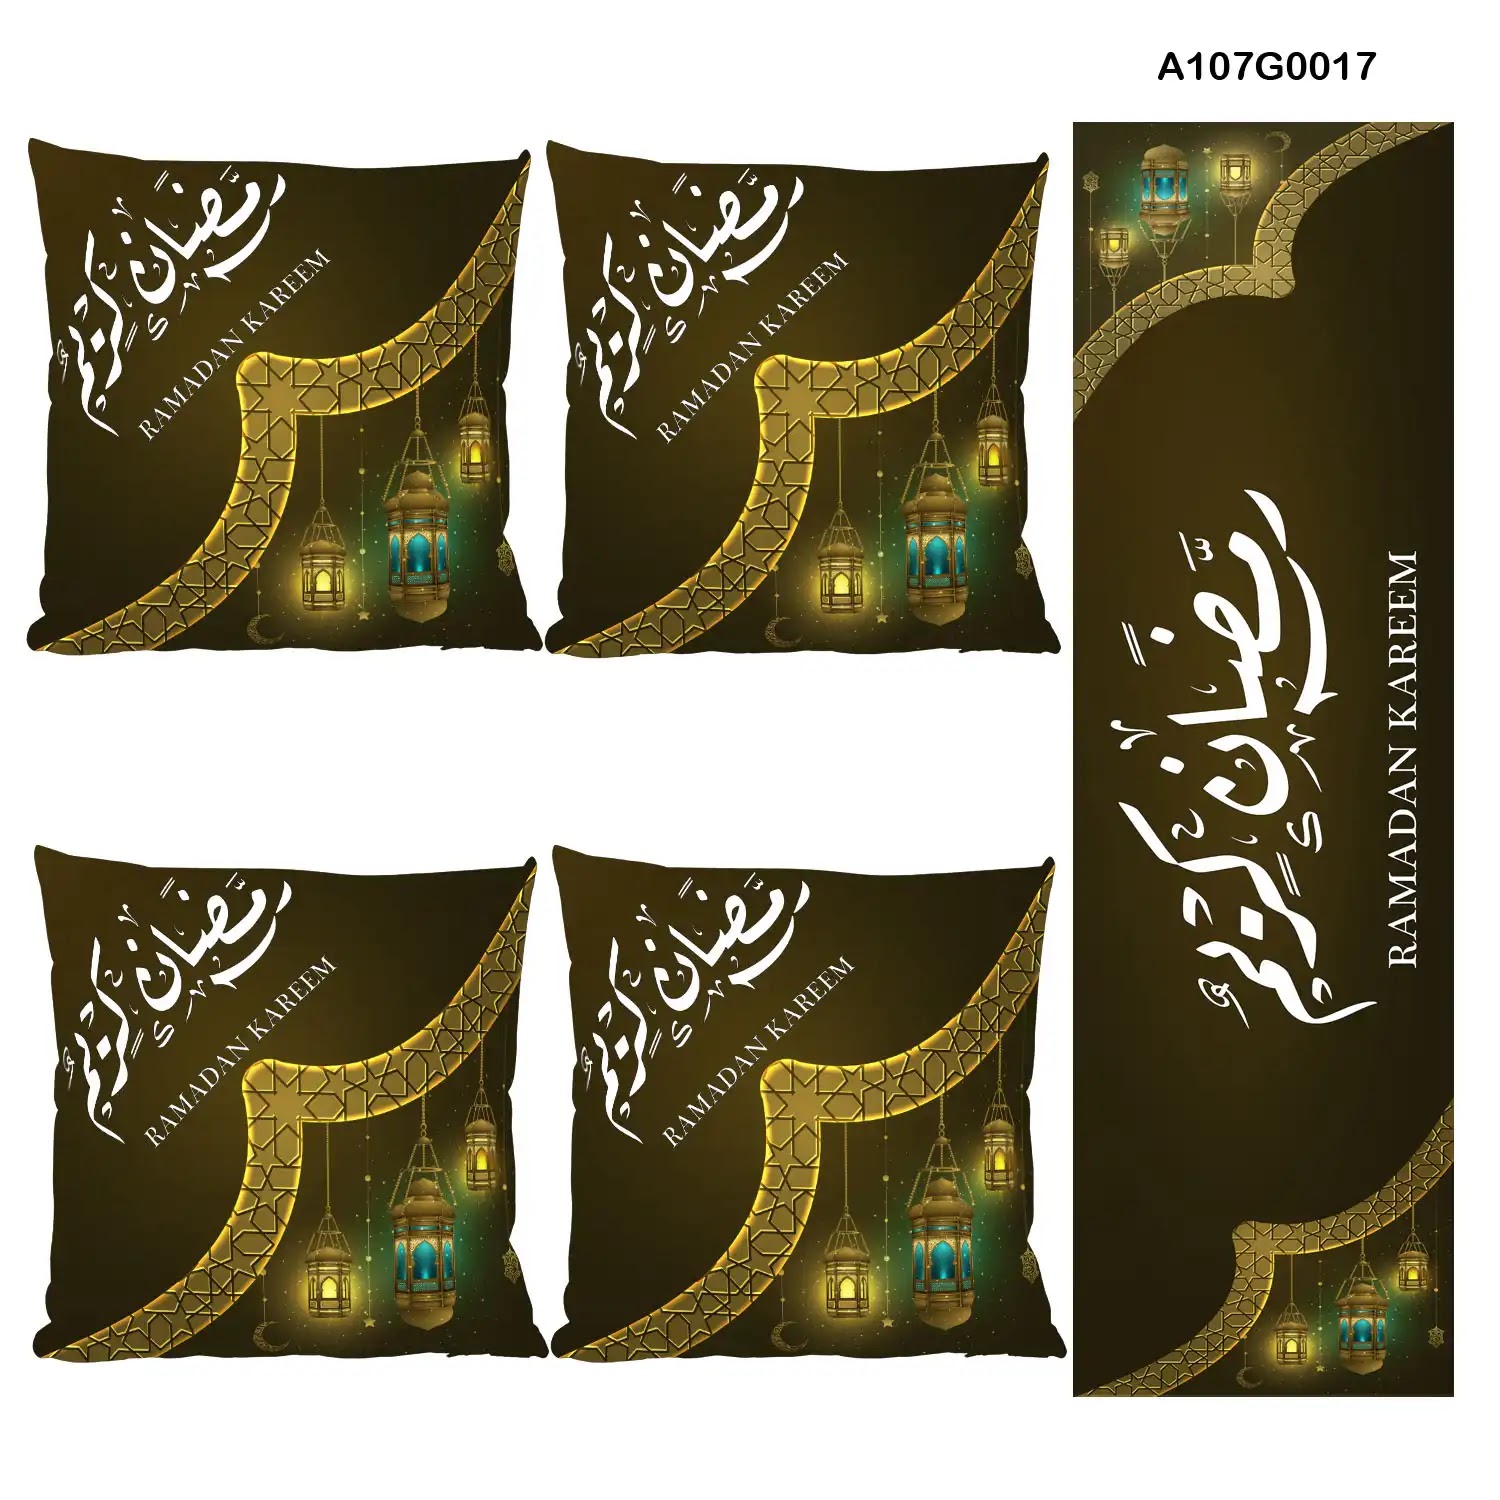 White and brown Pillow cover set & table runner for Ramadan